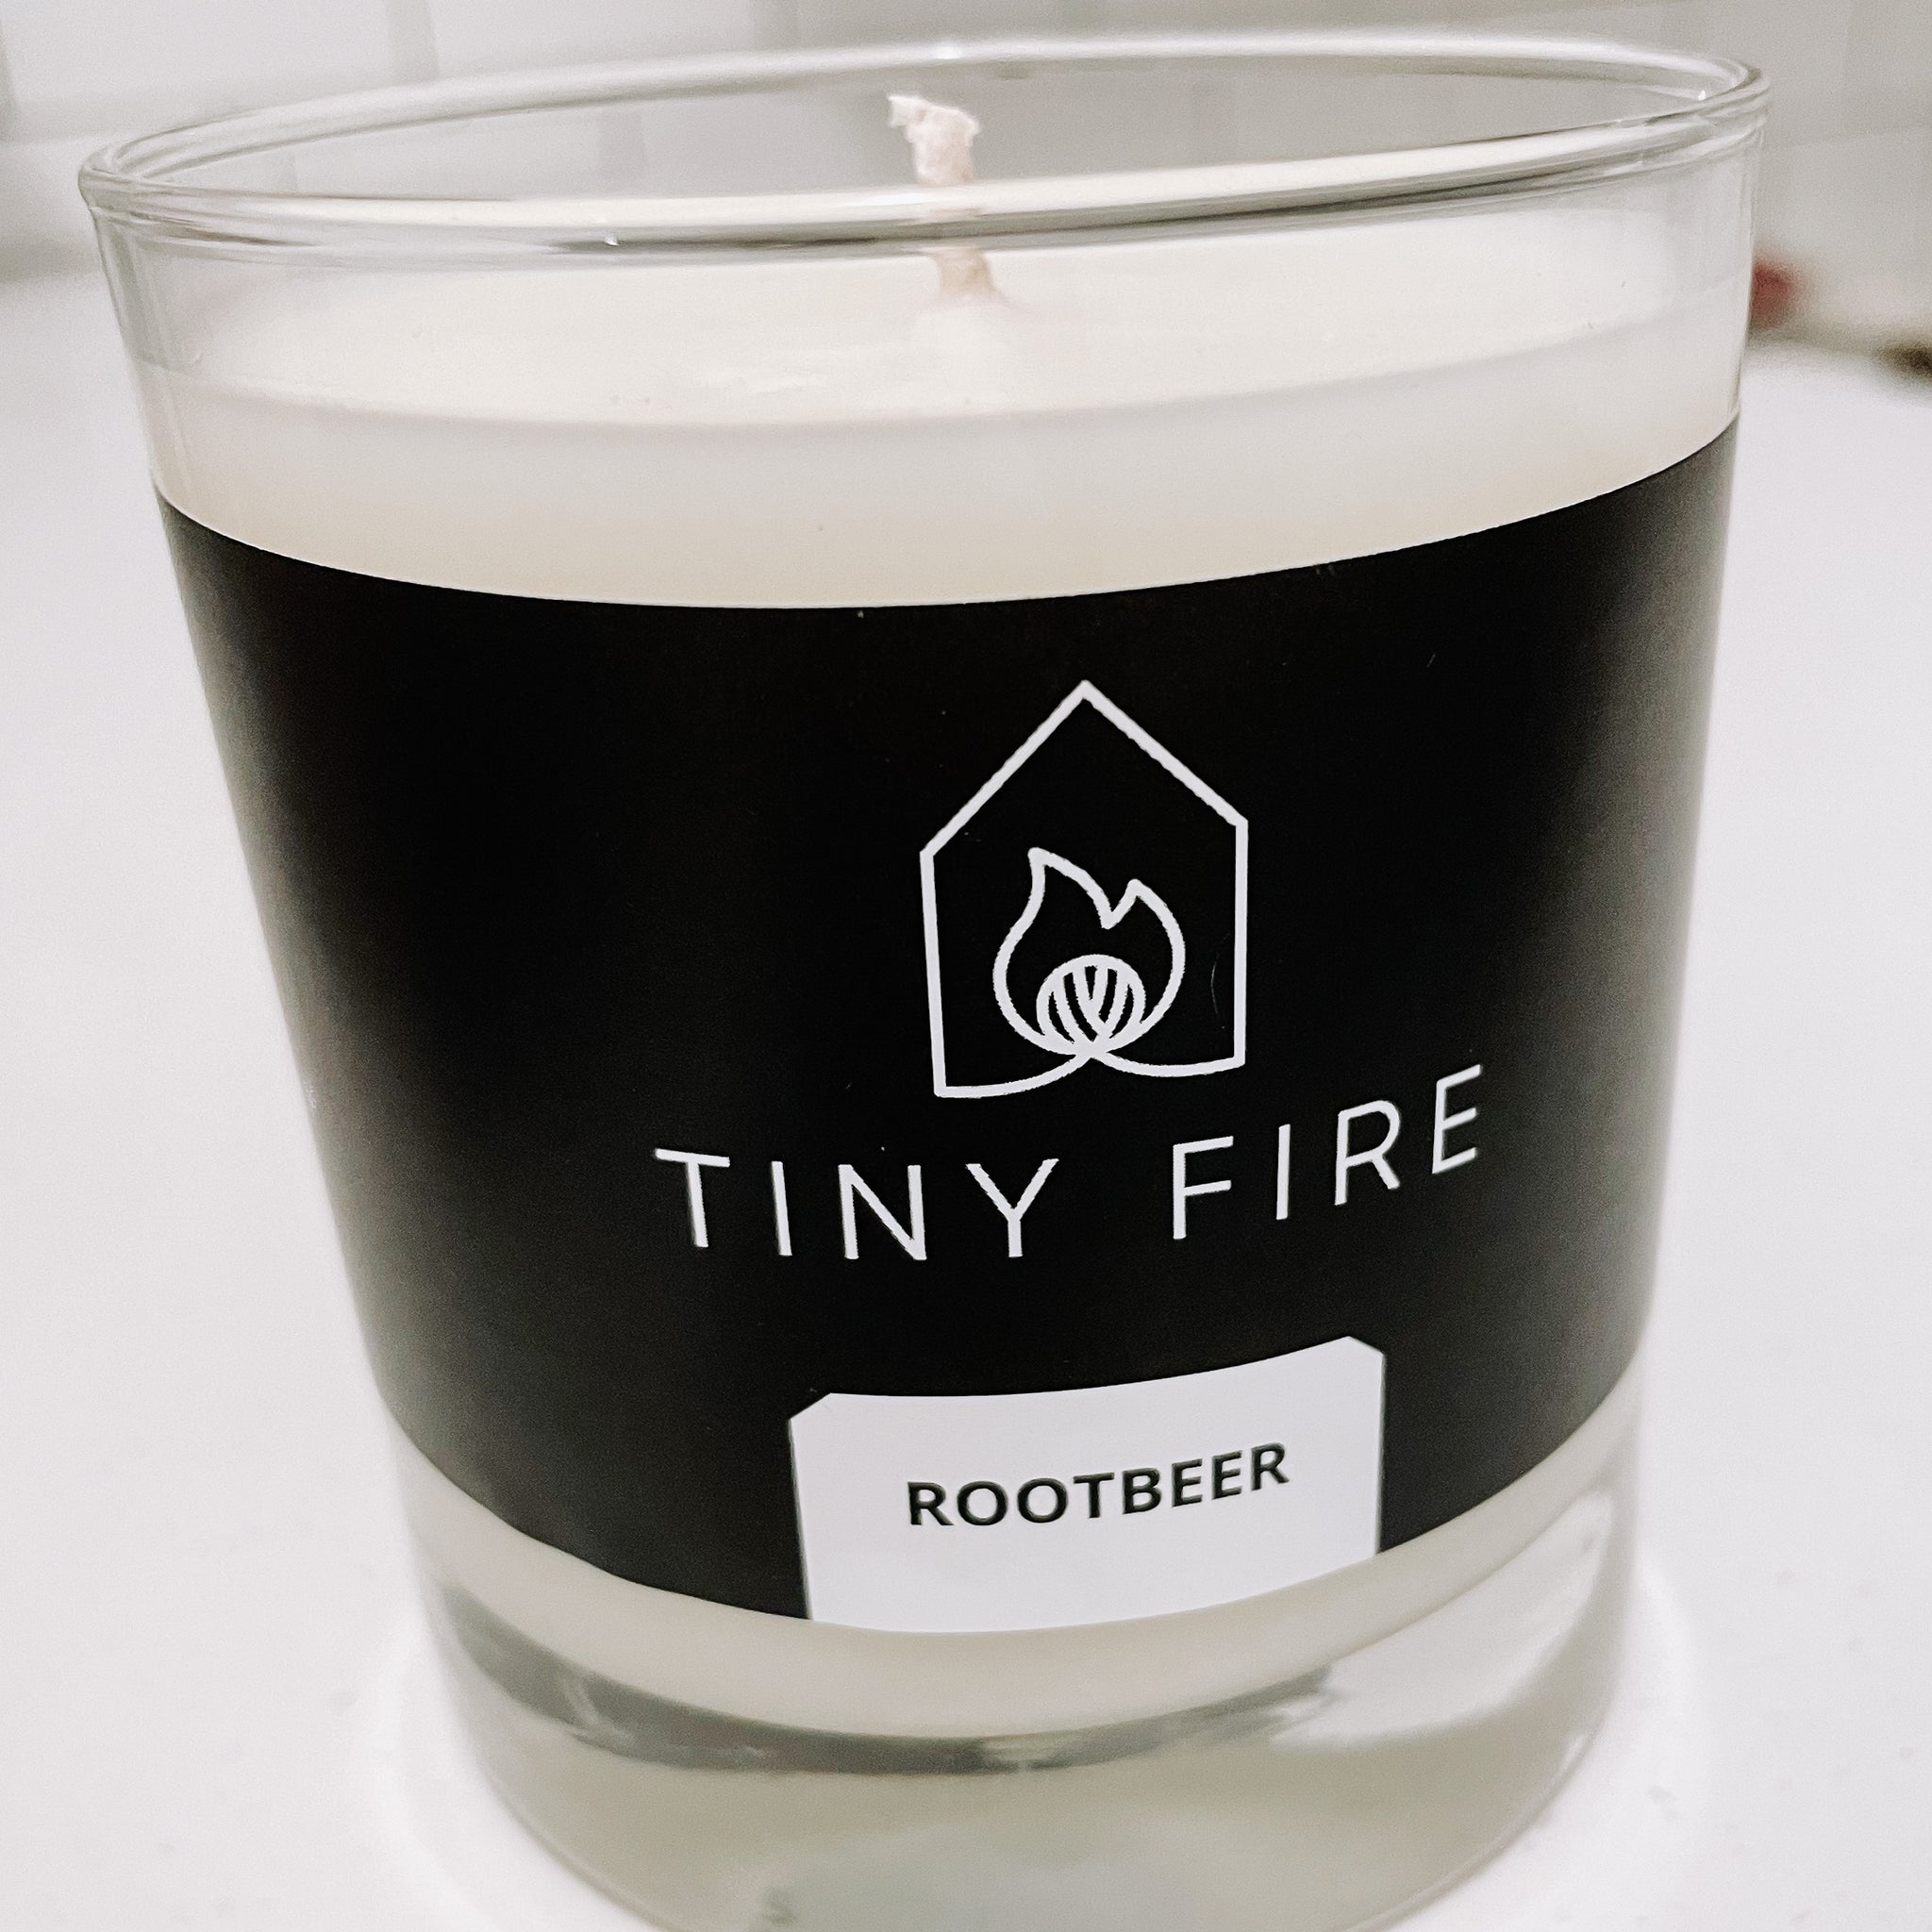 The Rootbeer Candle